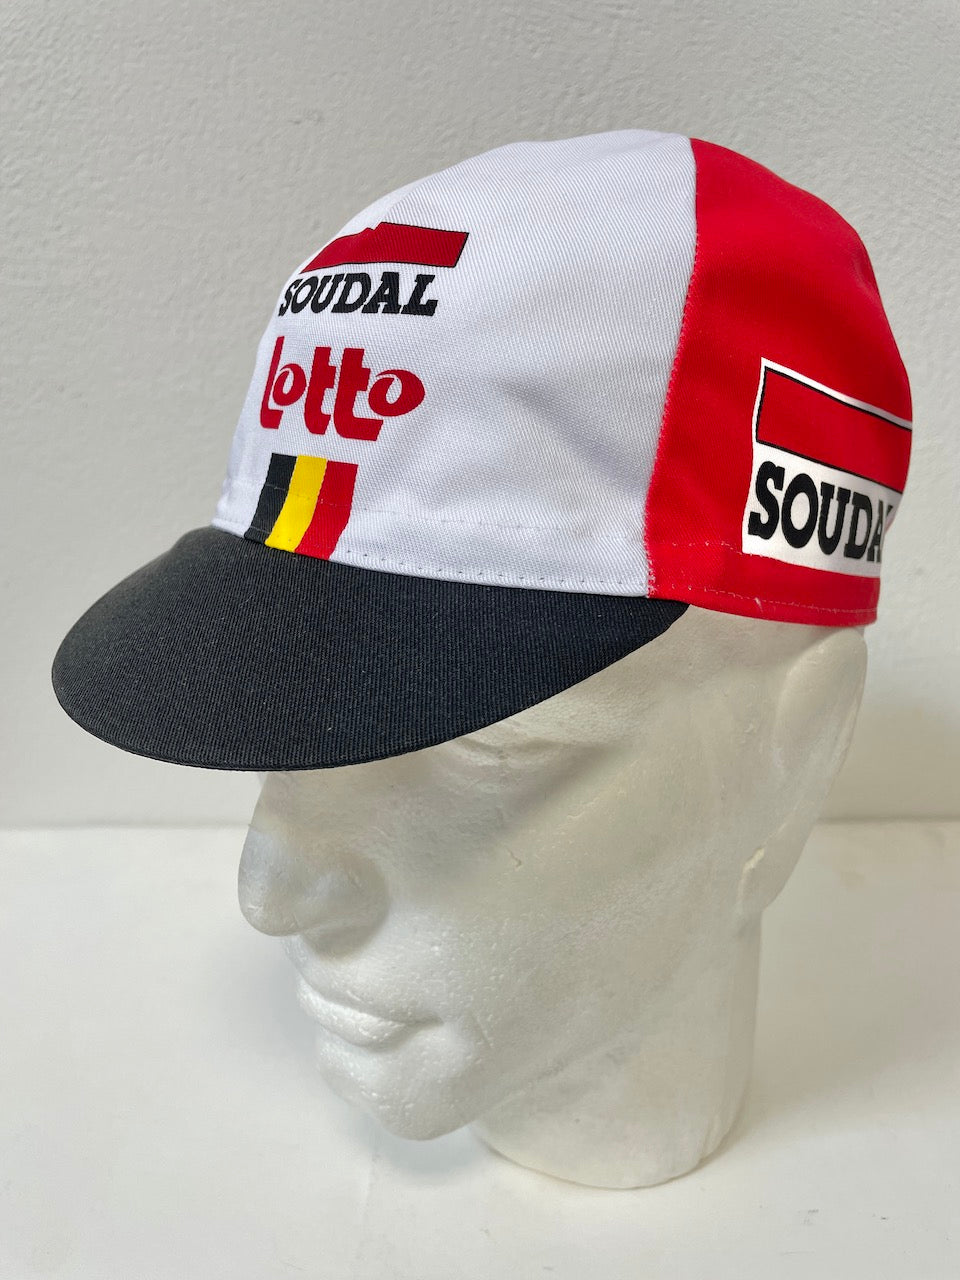 2020 Lotto Jumbo Cycling Cap made in Italy by Apis | Cento Cycling